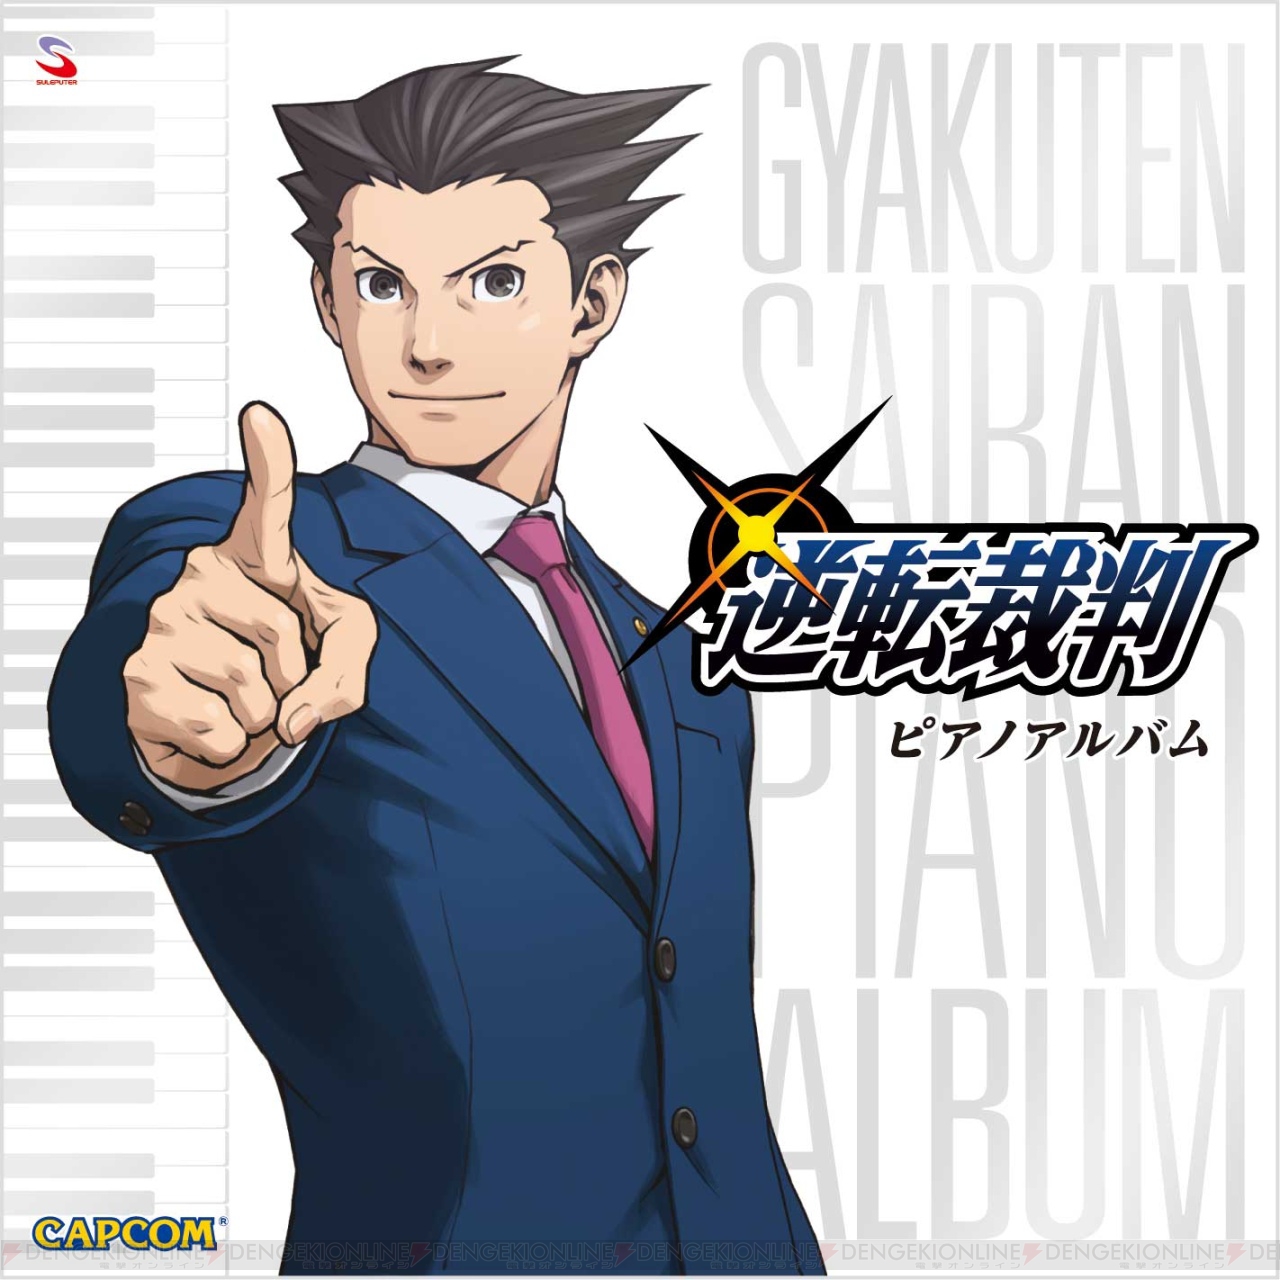 Ace Attorney Orchestra 2021 announced and will be streamed